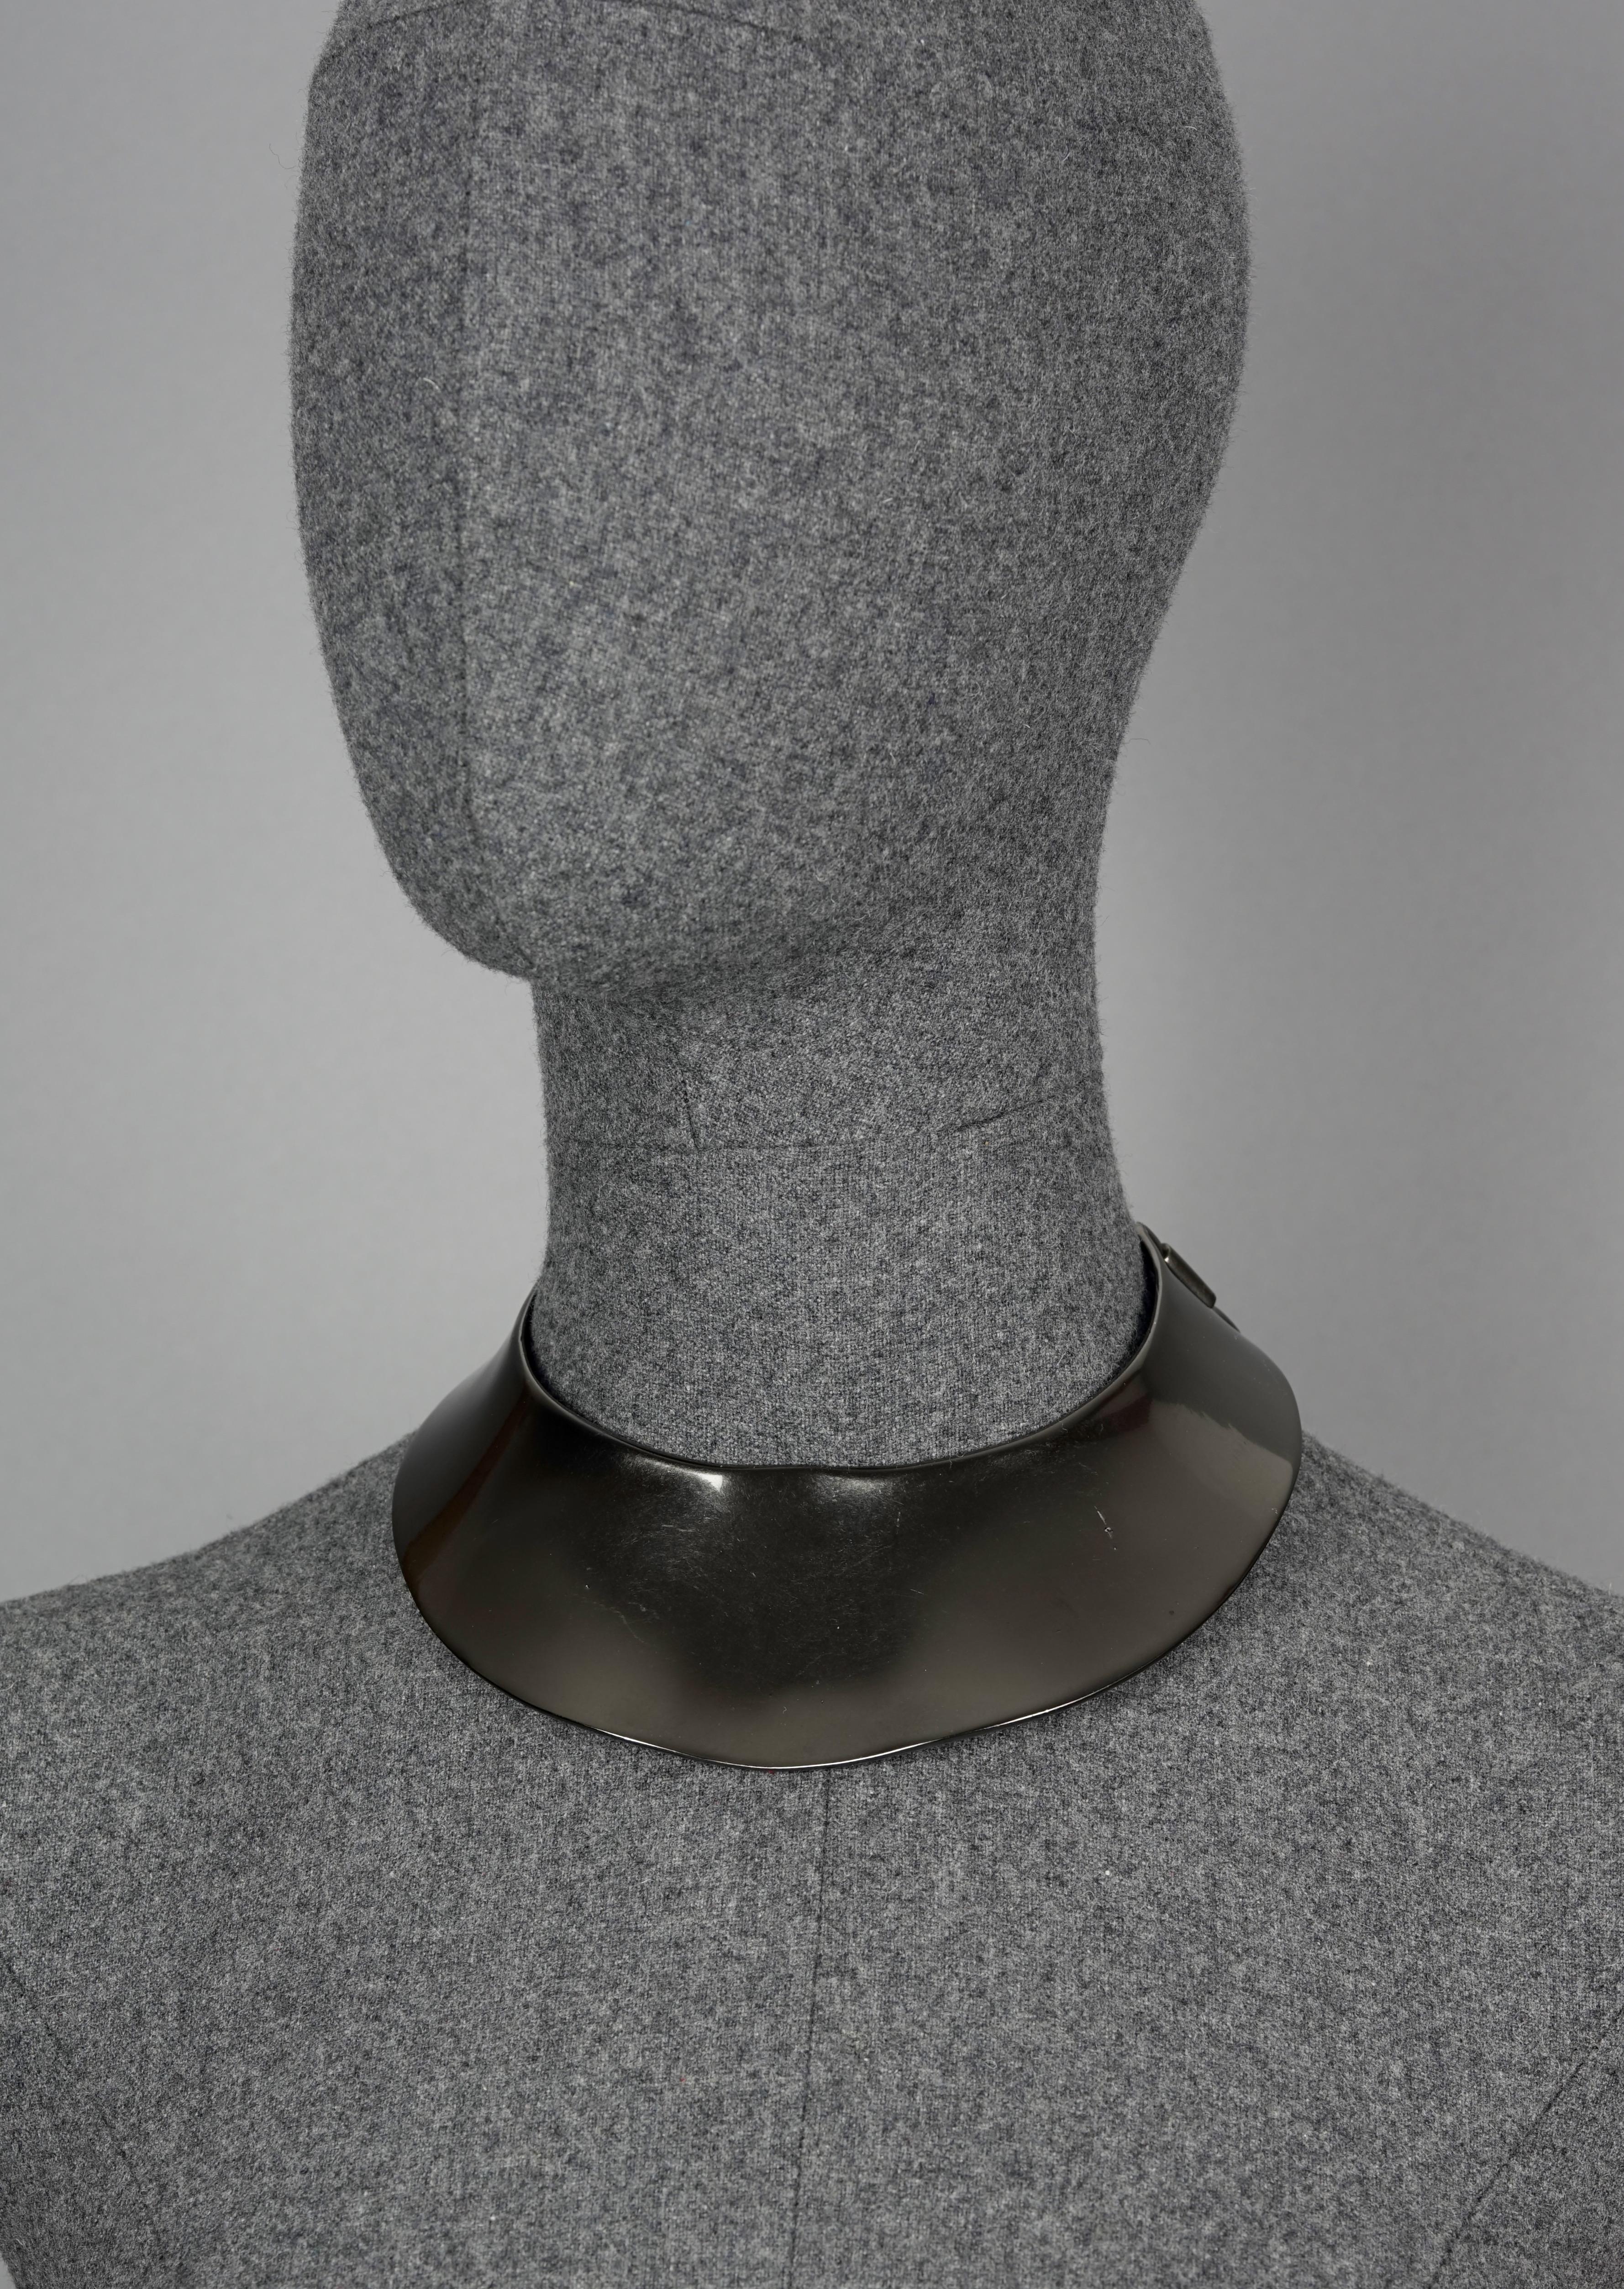 Vintage RARE CHRISTIAN DIOR by Robert Goossens Space Age Bib Collar Choker Necklace

Measurements:
Height: 2 1/8 inches (center)

Features:
- 100% Authentic CHRISTIAN DIOR.
- Space age style bib collar choker.
- Irregular shape.
- Metallic gray